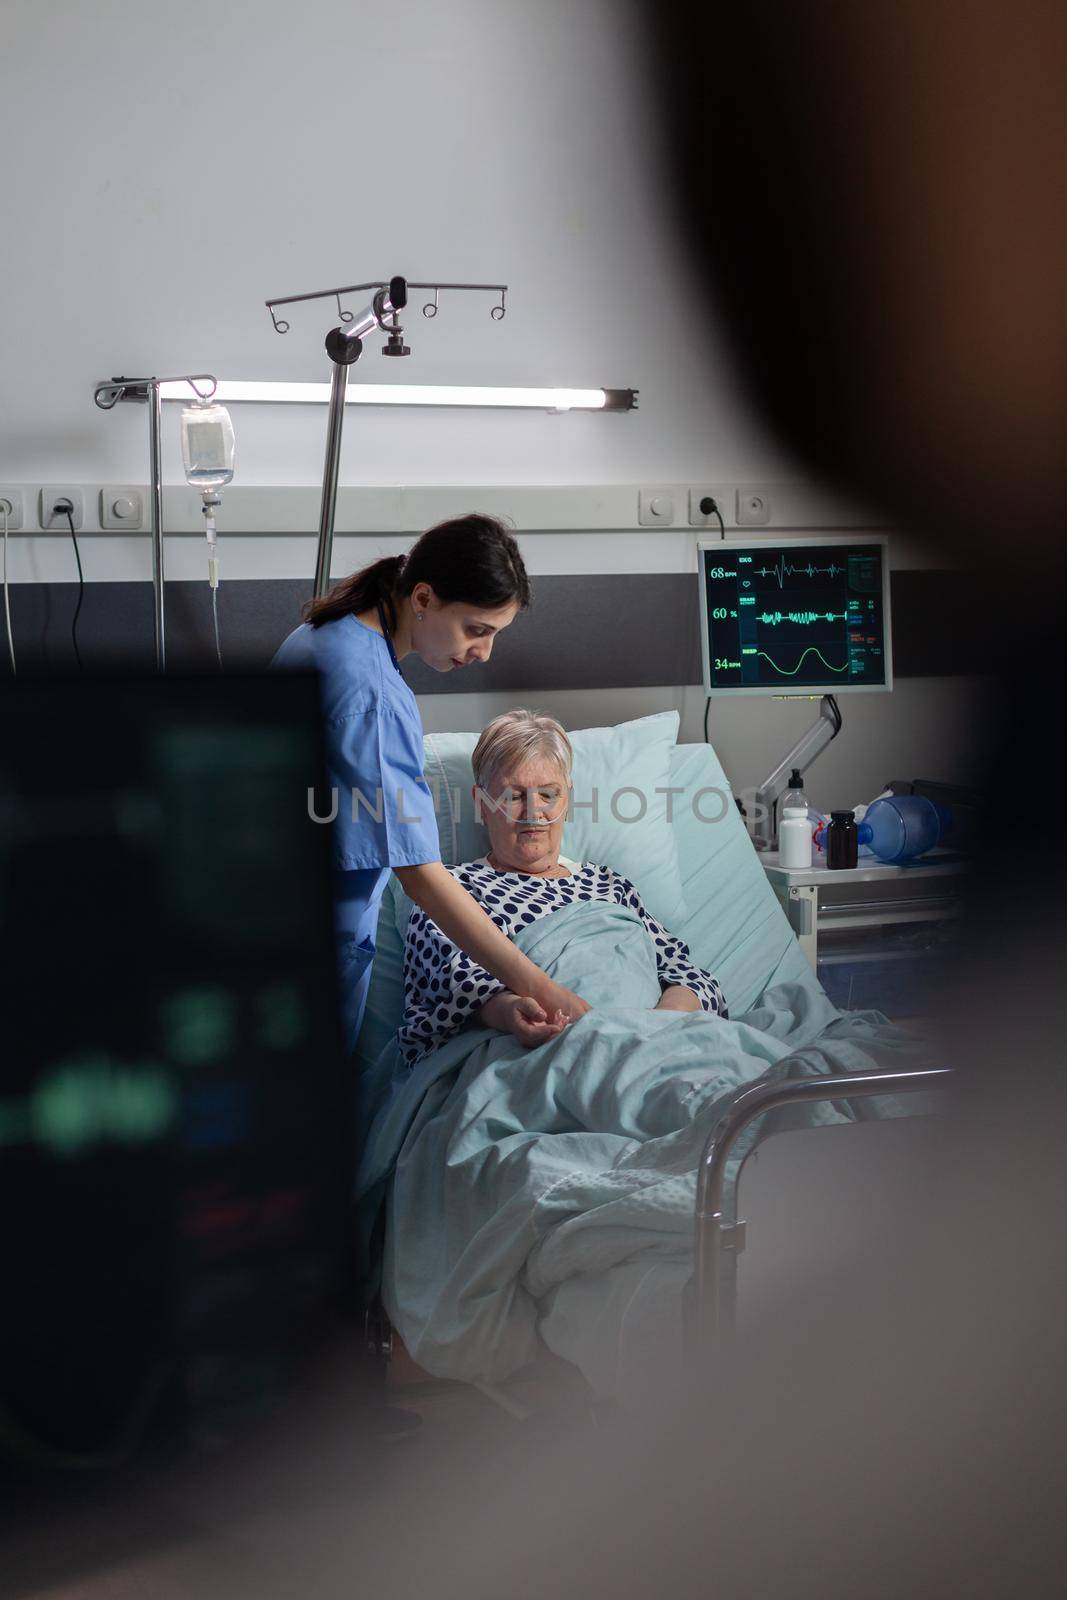 Friendly doctor reassuring sick old patient holding hands, showing emphaty, encouragement, during medical examination in hospital room. Patient breathing through oxygen mask.